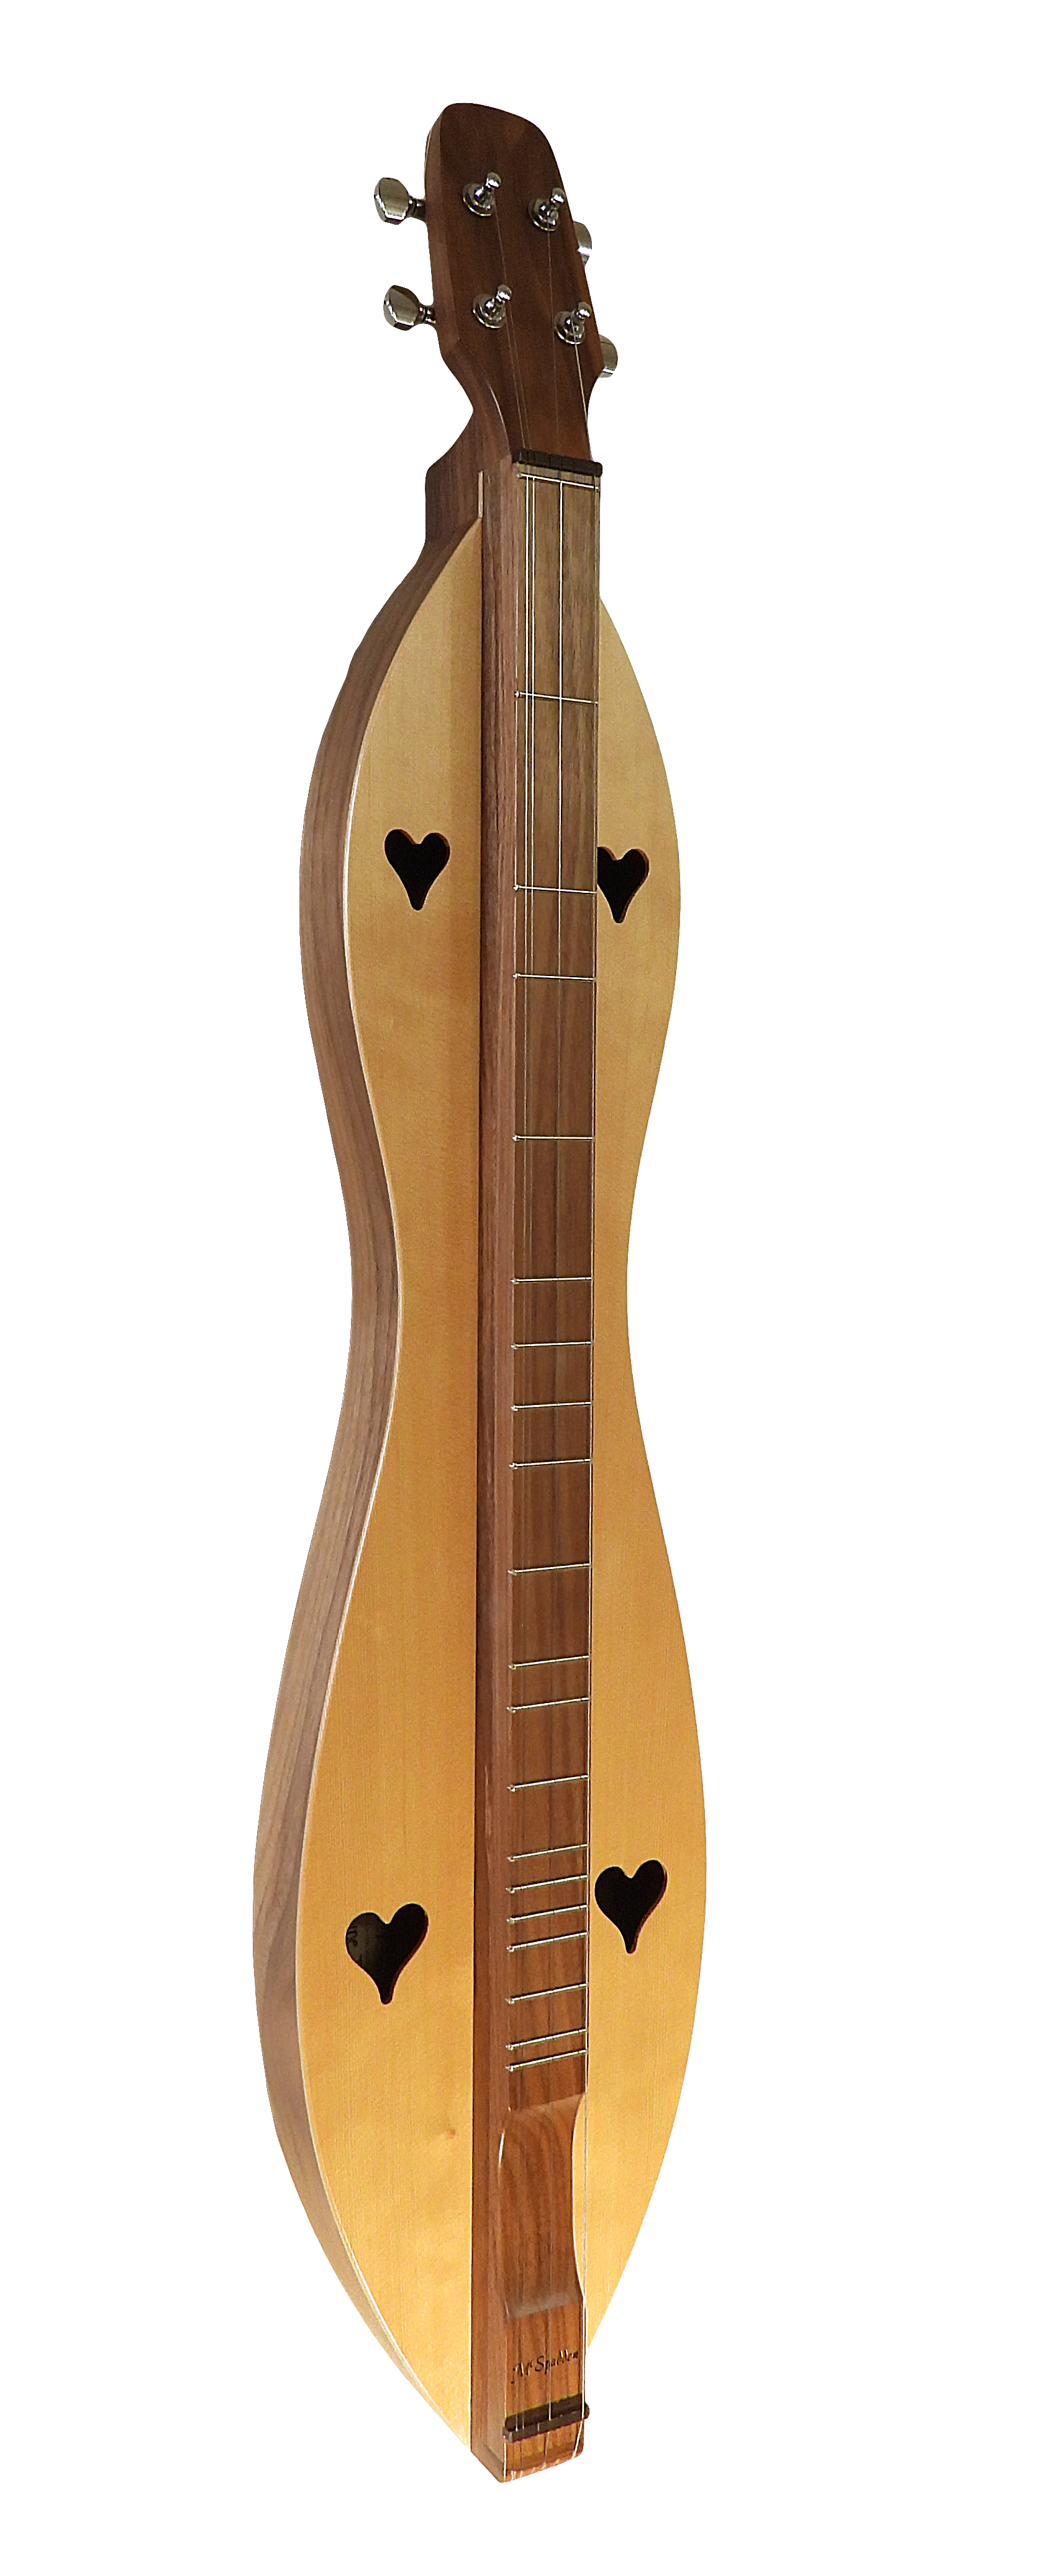 A 4 String, Flathead, Hourglass, with Walnut back and sides, Spruce top mandolin with a padded Navy nylon case and two hearts on it.